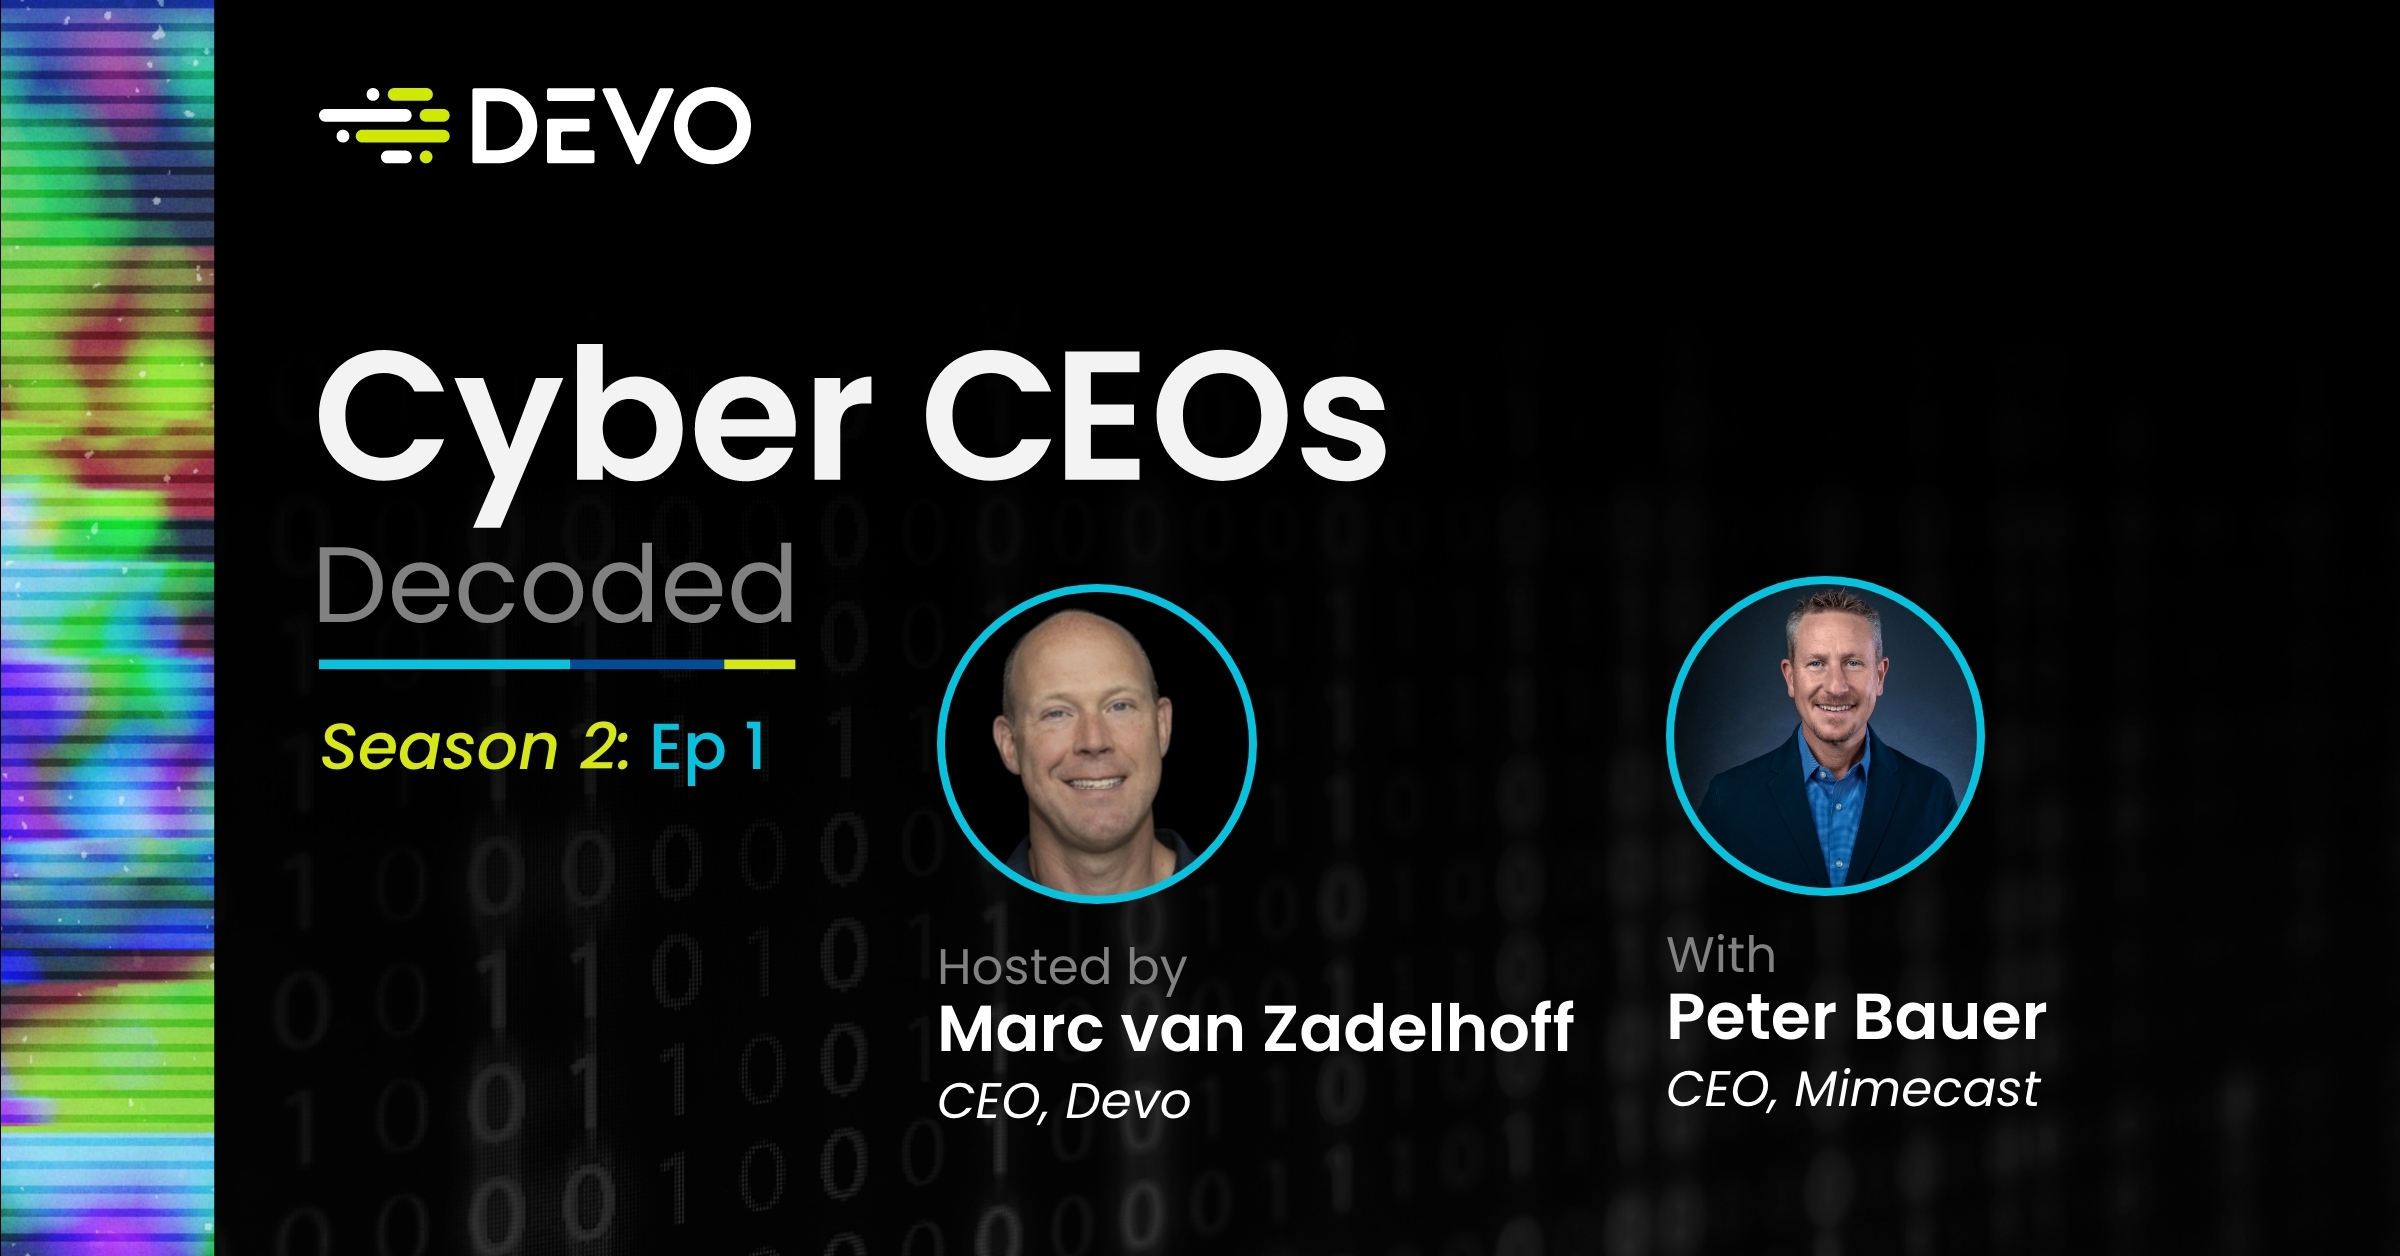 Cyber CEOs Decoded Season 2 Episode 1 - Peter Bauer